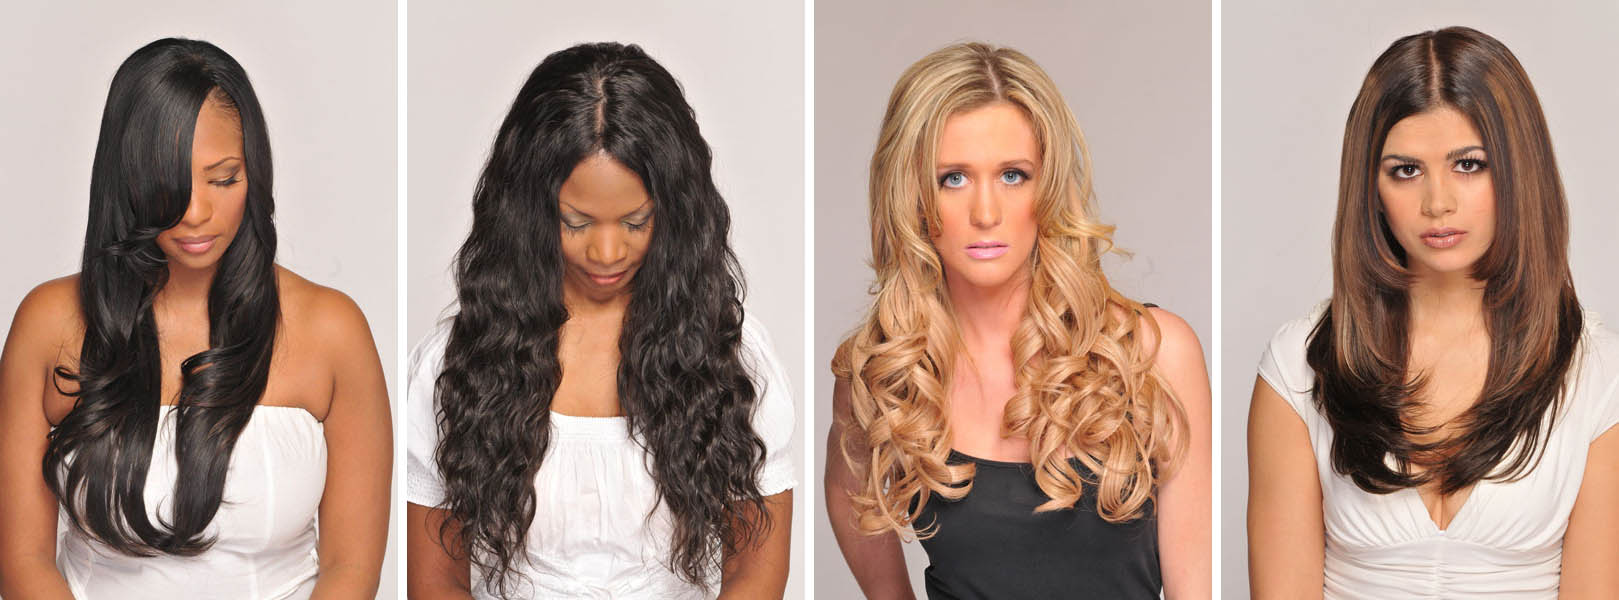 Home | Chicago Custom Wigs, Hair Extensions and Hair Weaving